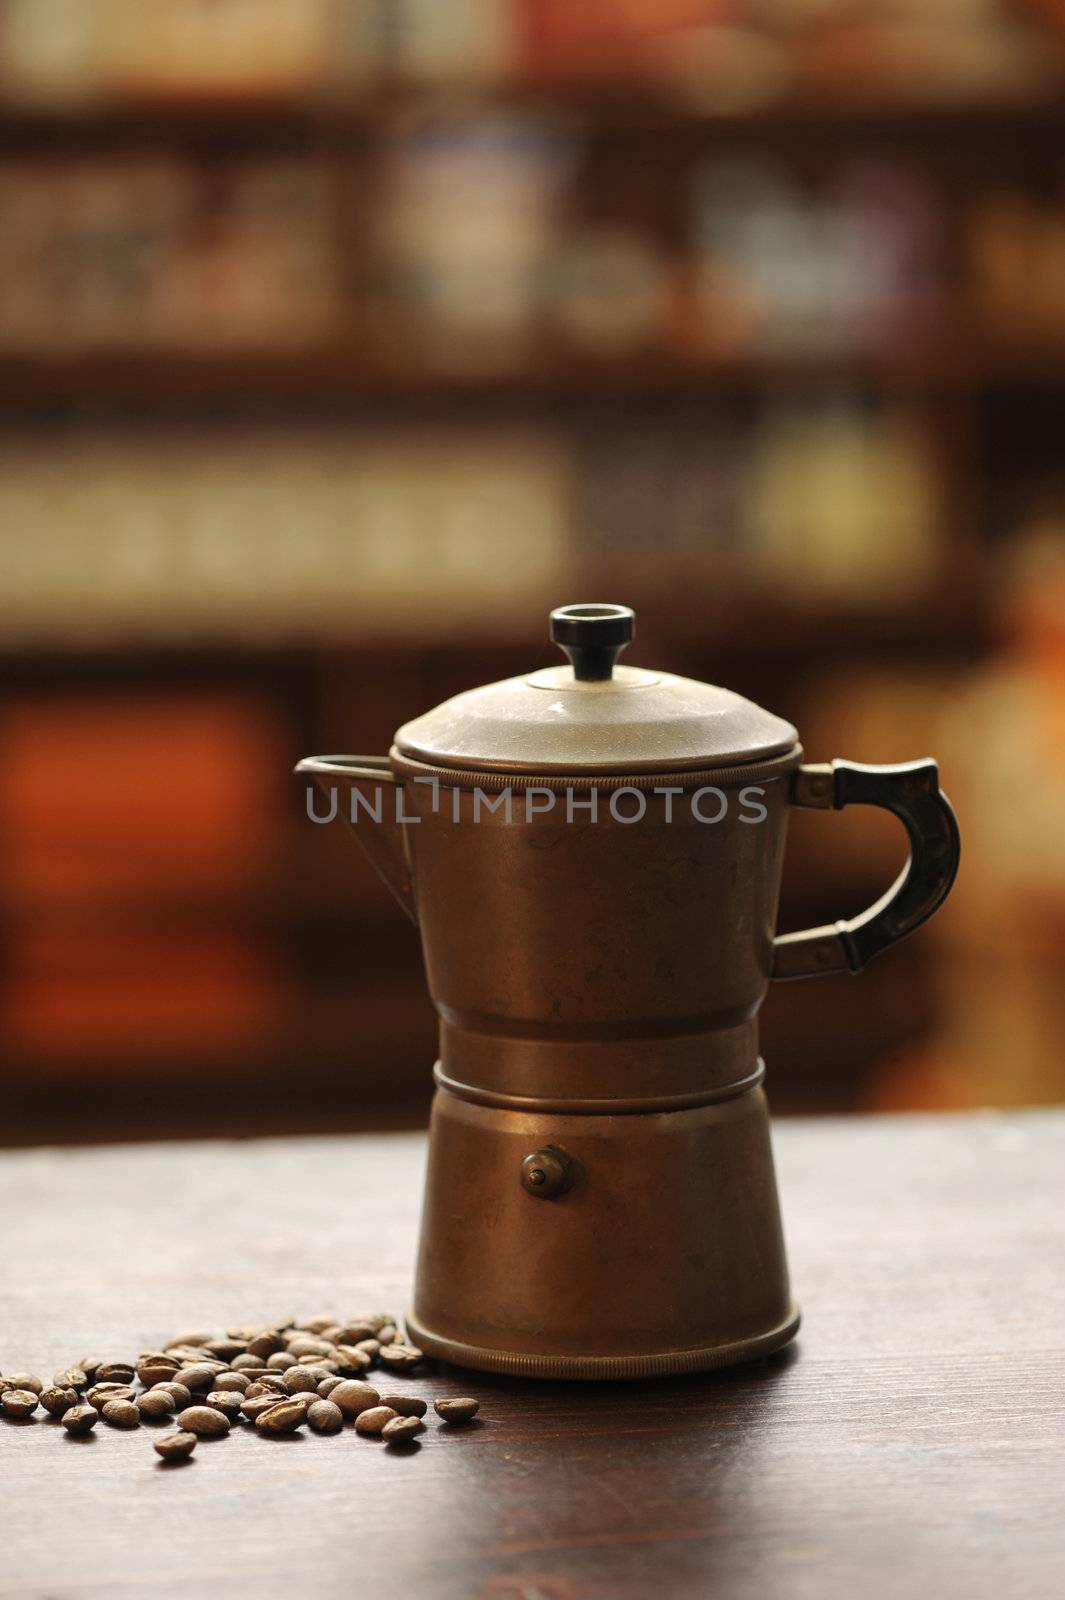 old coffee maker by stokkete